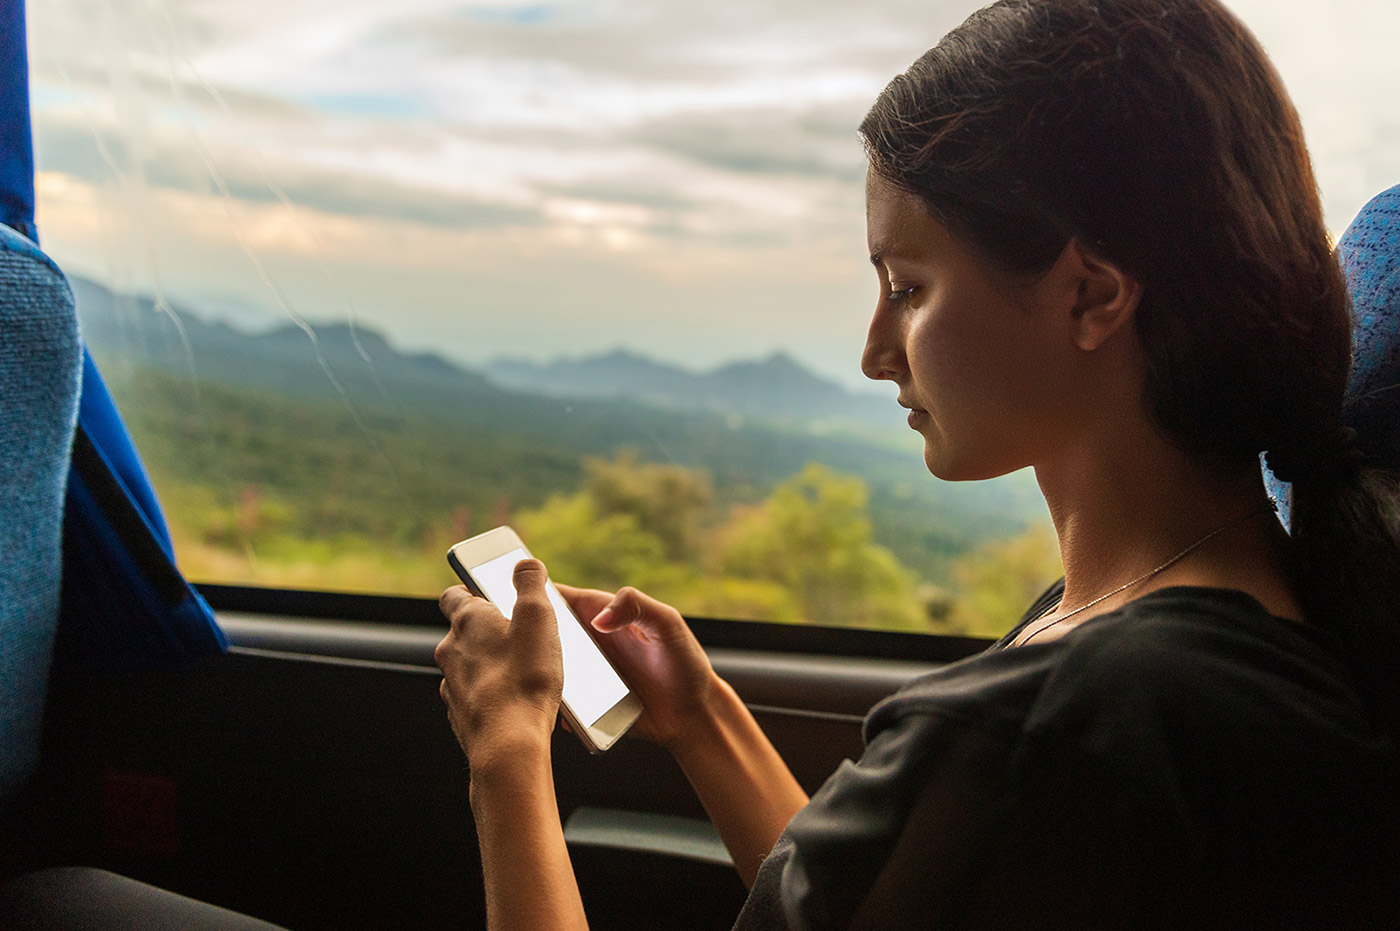 A young woman texting on her phone while traveling on a bus.